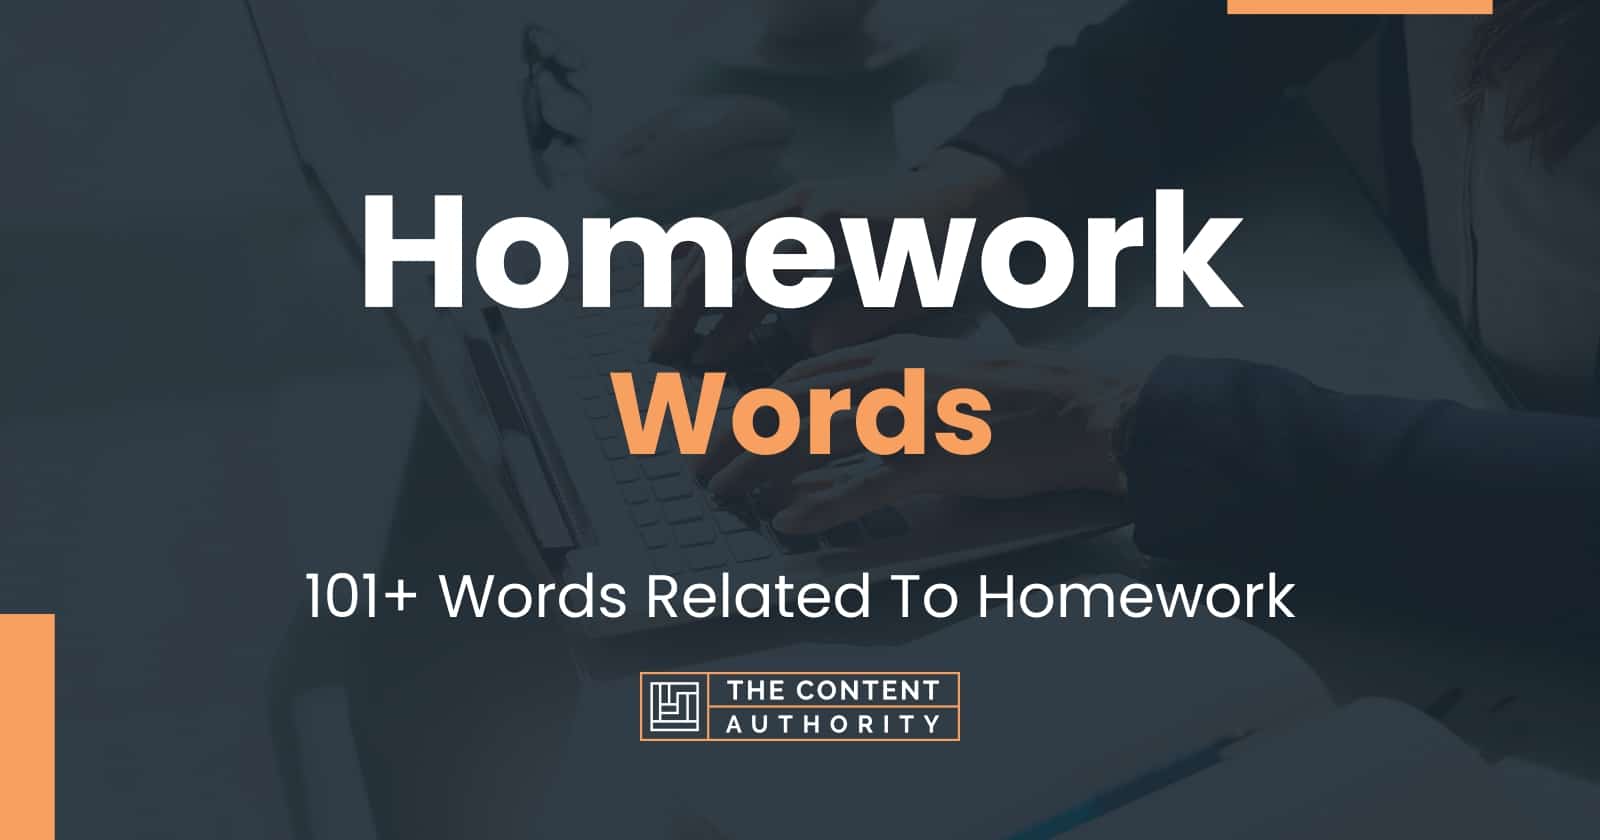 is homework one word or two words